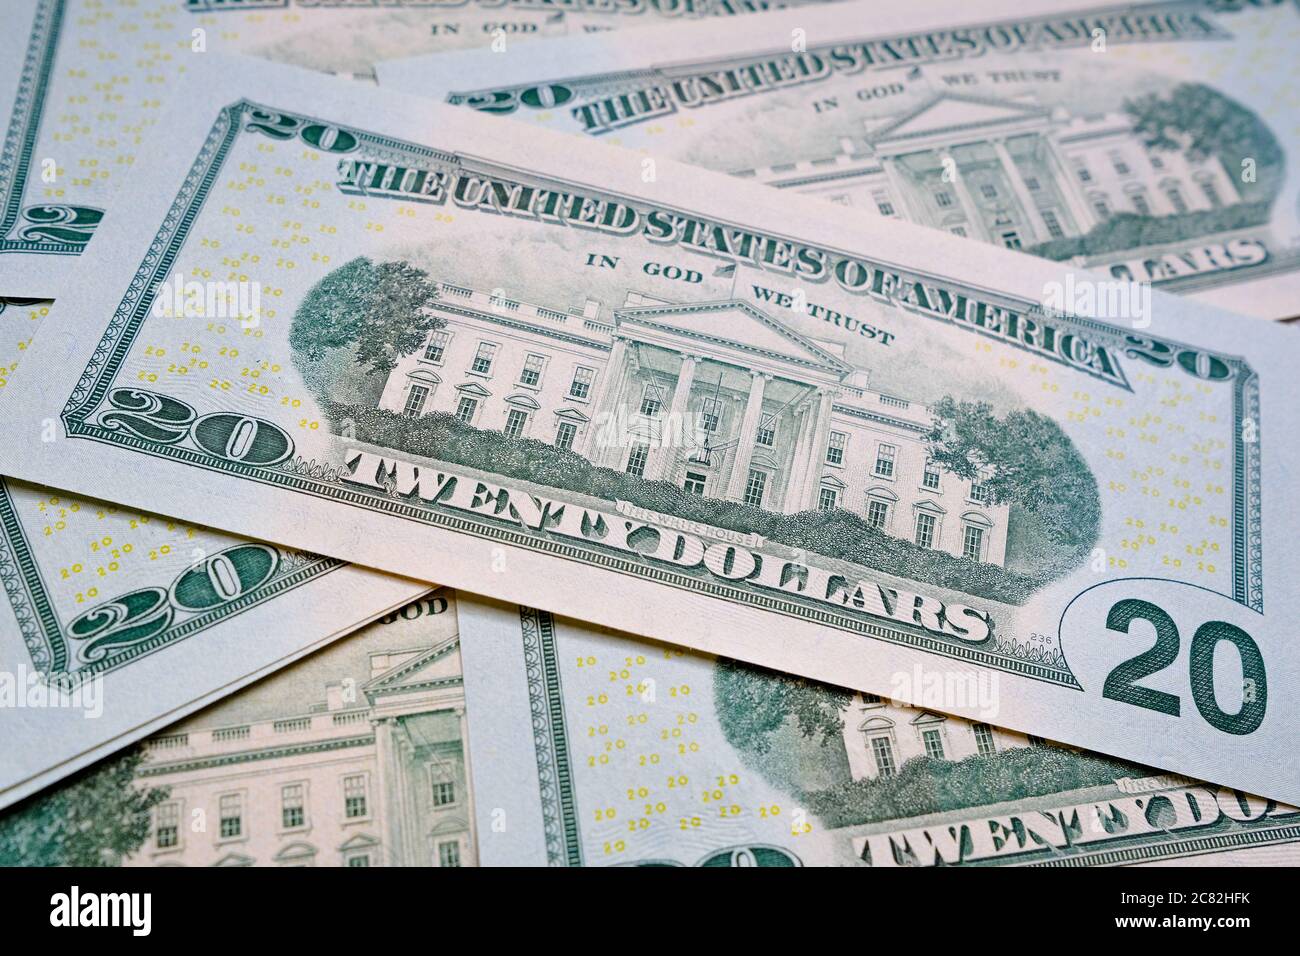 White House seen on 20 US dollars banknote which is placed on top of pile of other cash. Selective focus. Stock Photo